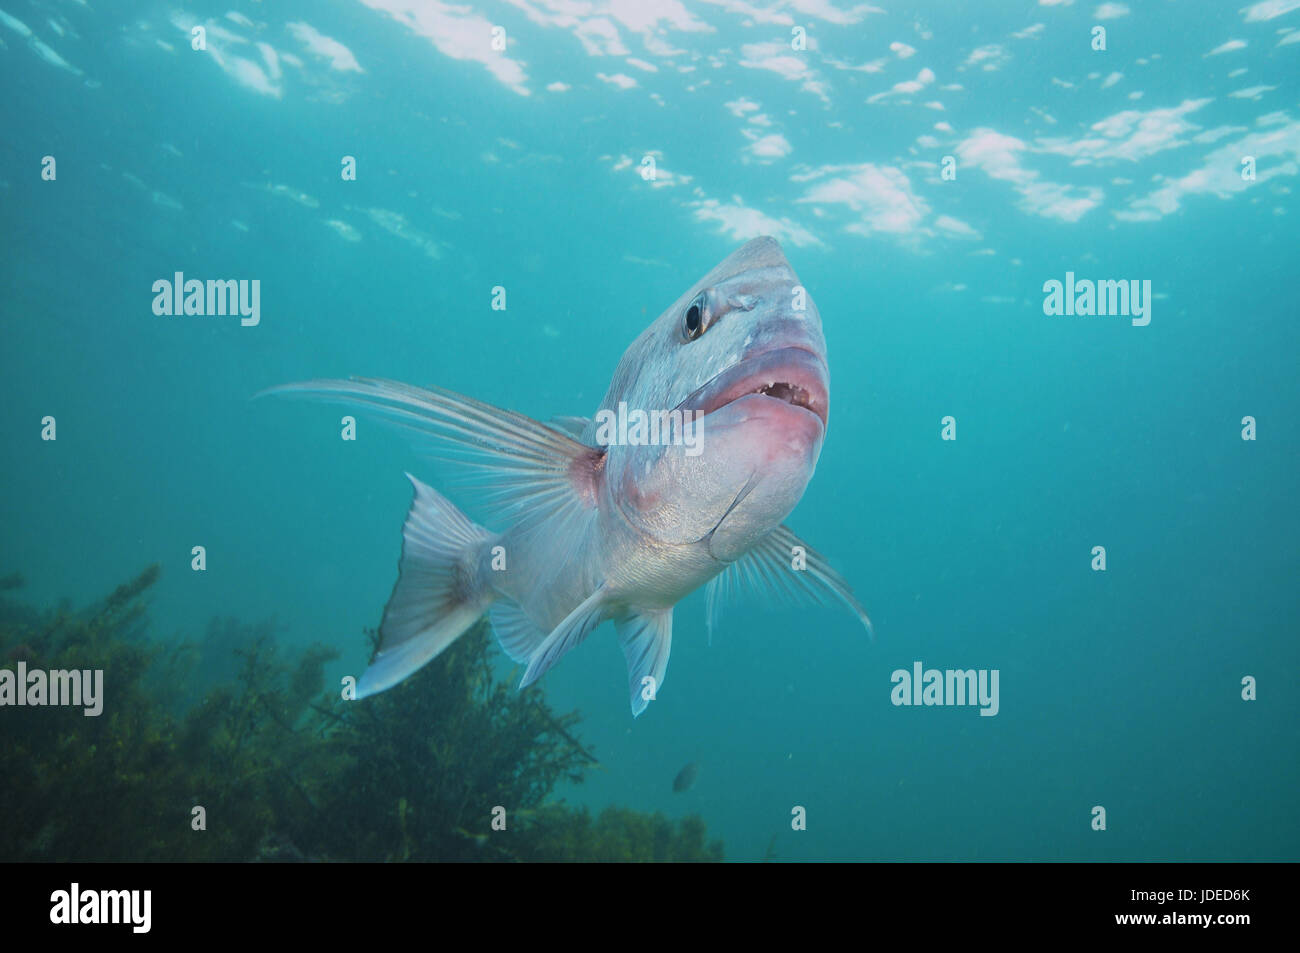 Frontal view of adult australasian snapper Pagrus auratus with sea surface and sea weeds in background. Stock Photo